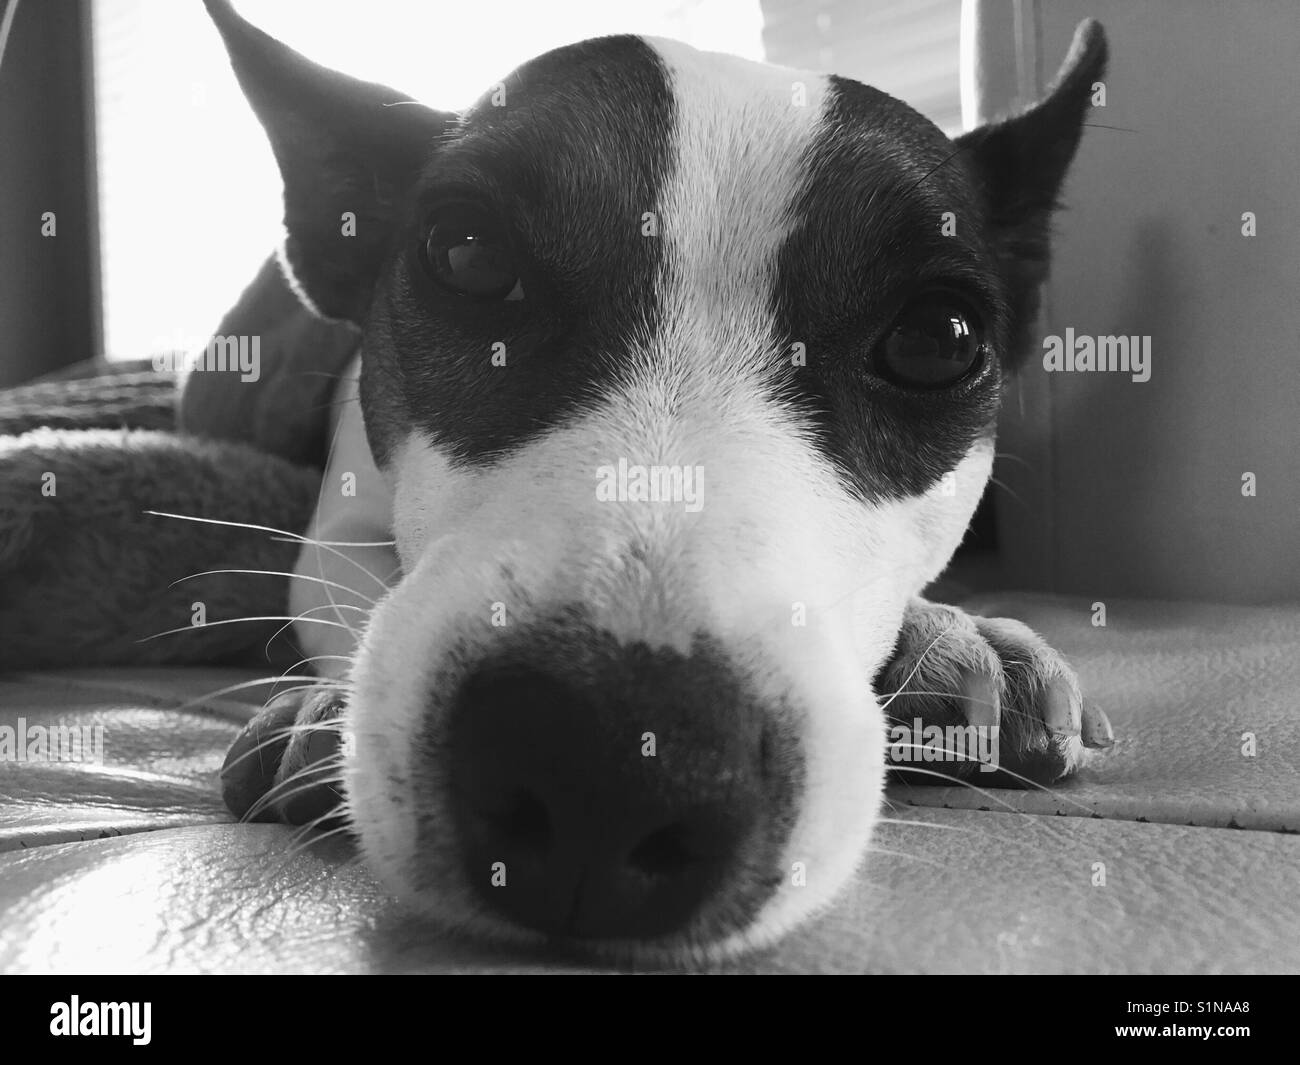 Jack Russell Terrier dog lounging and looking at the camera. In black and white. Stock Photo